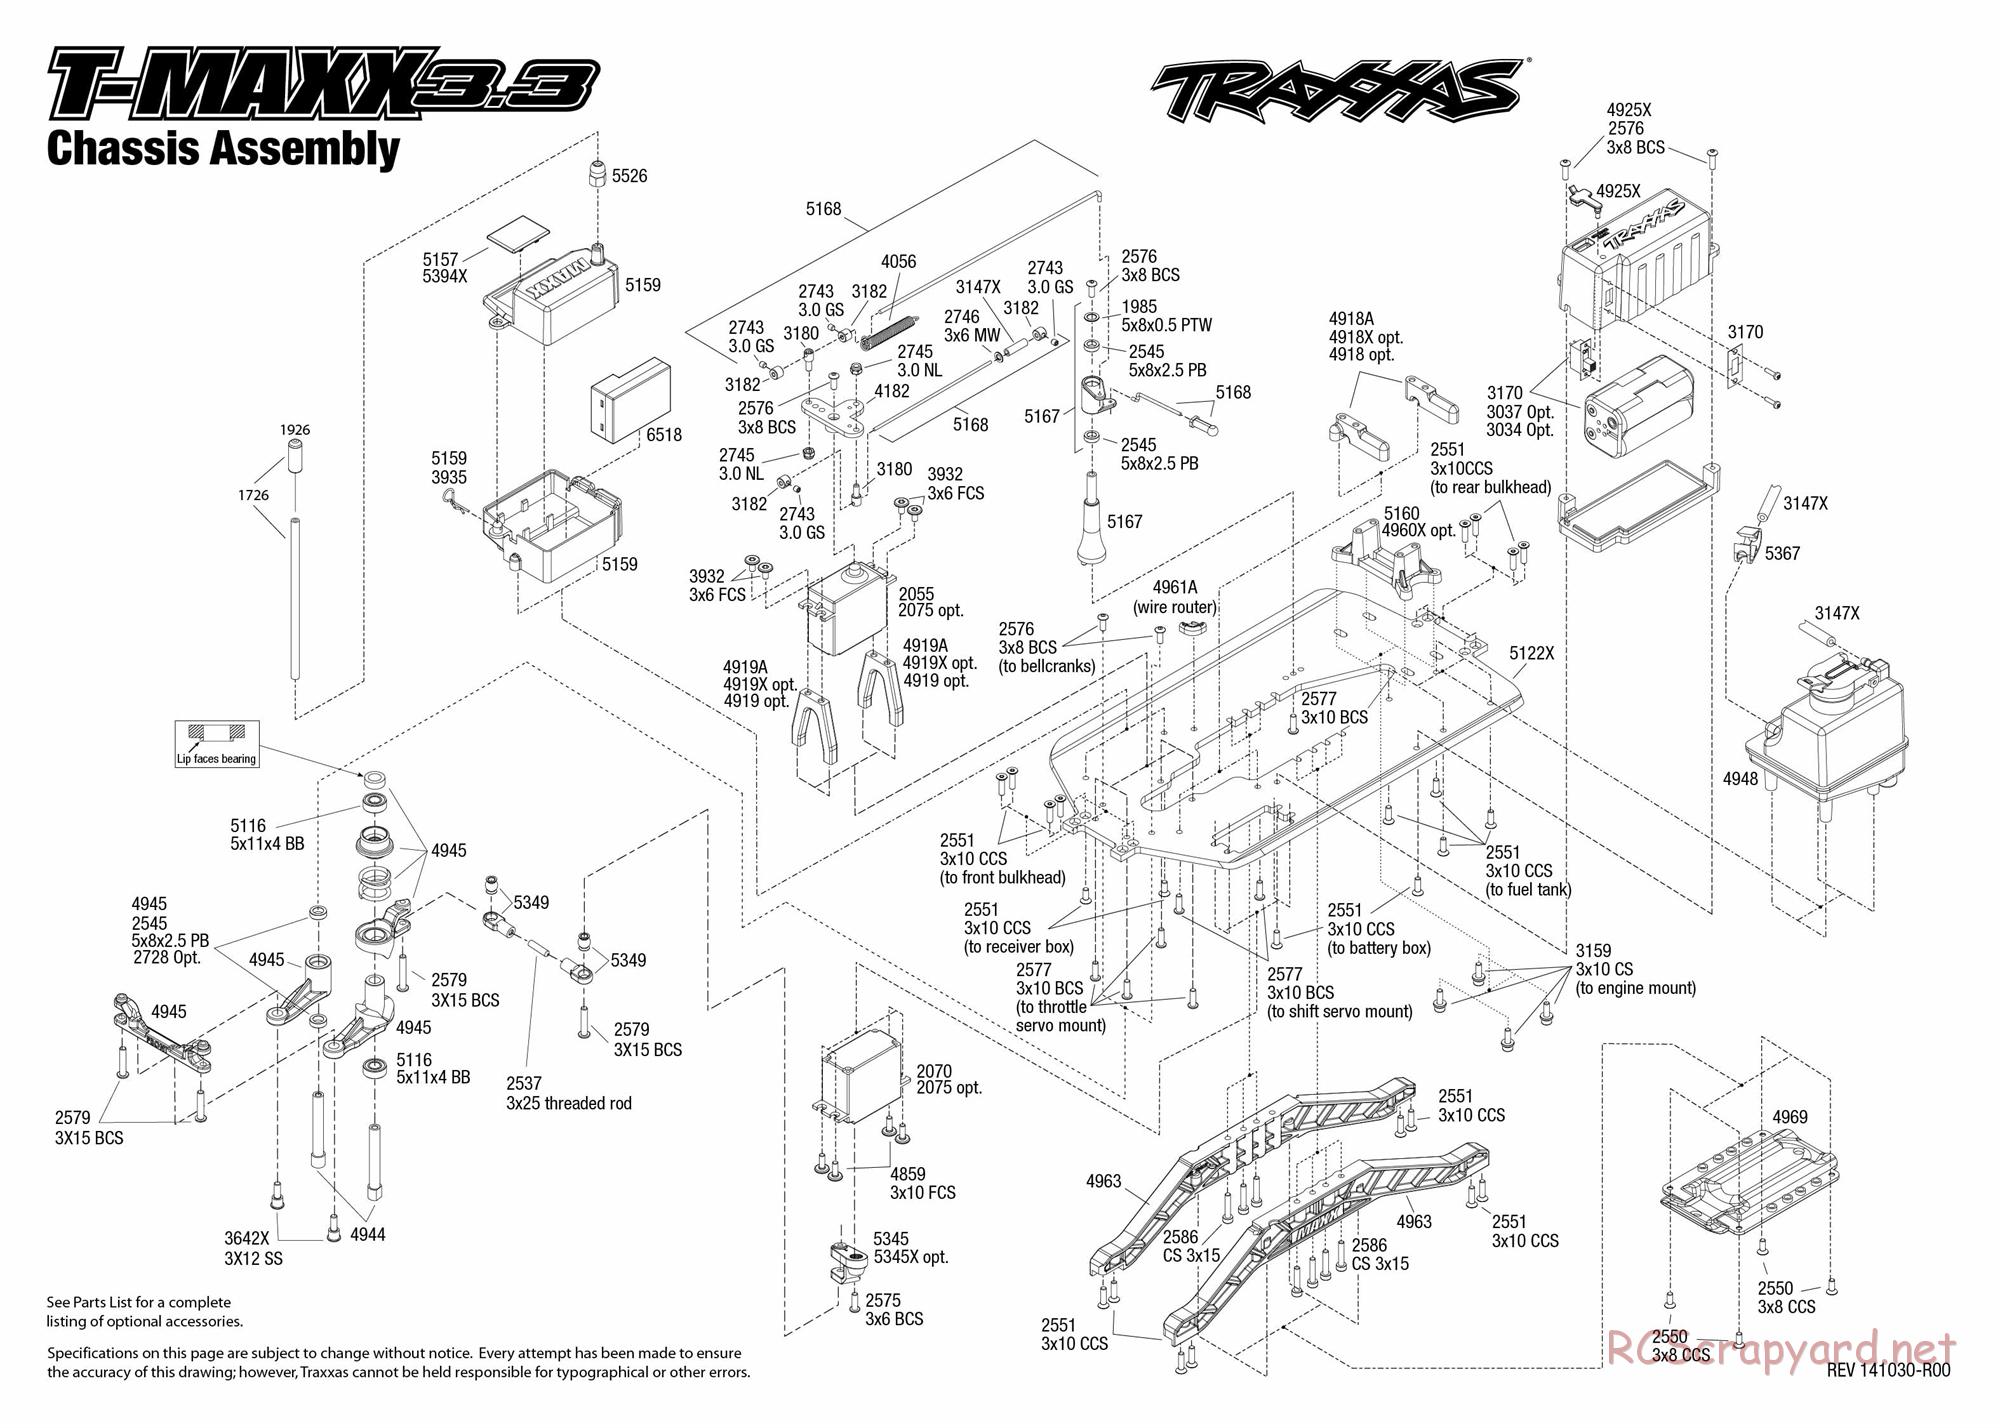 Traxxas - T-Maxx 3.3 (2015) - Exploded Views - Page 1